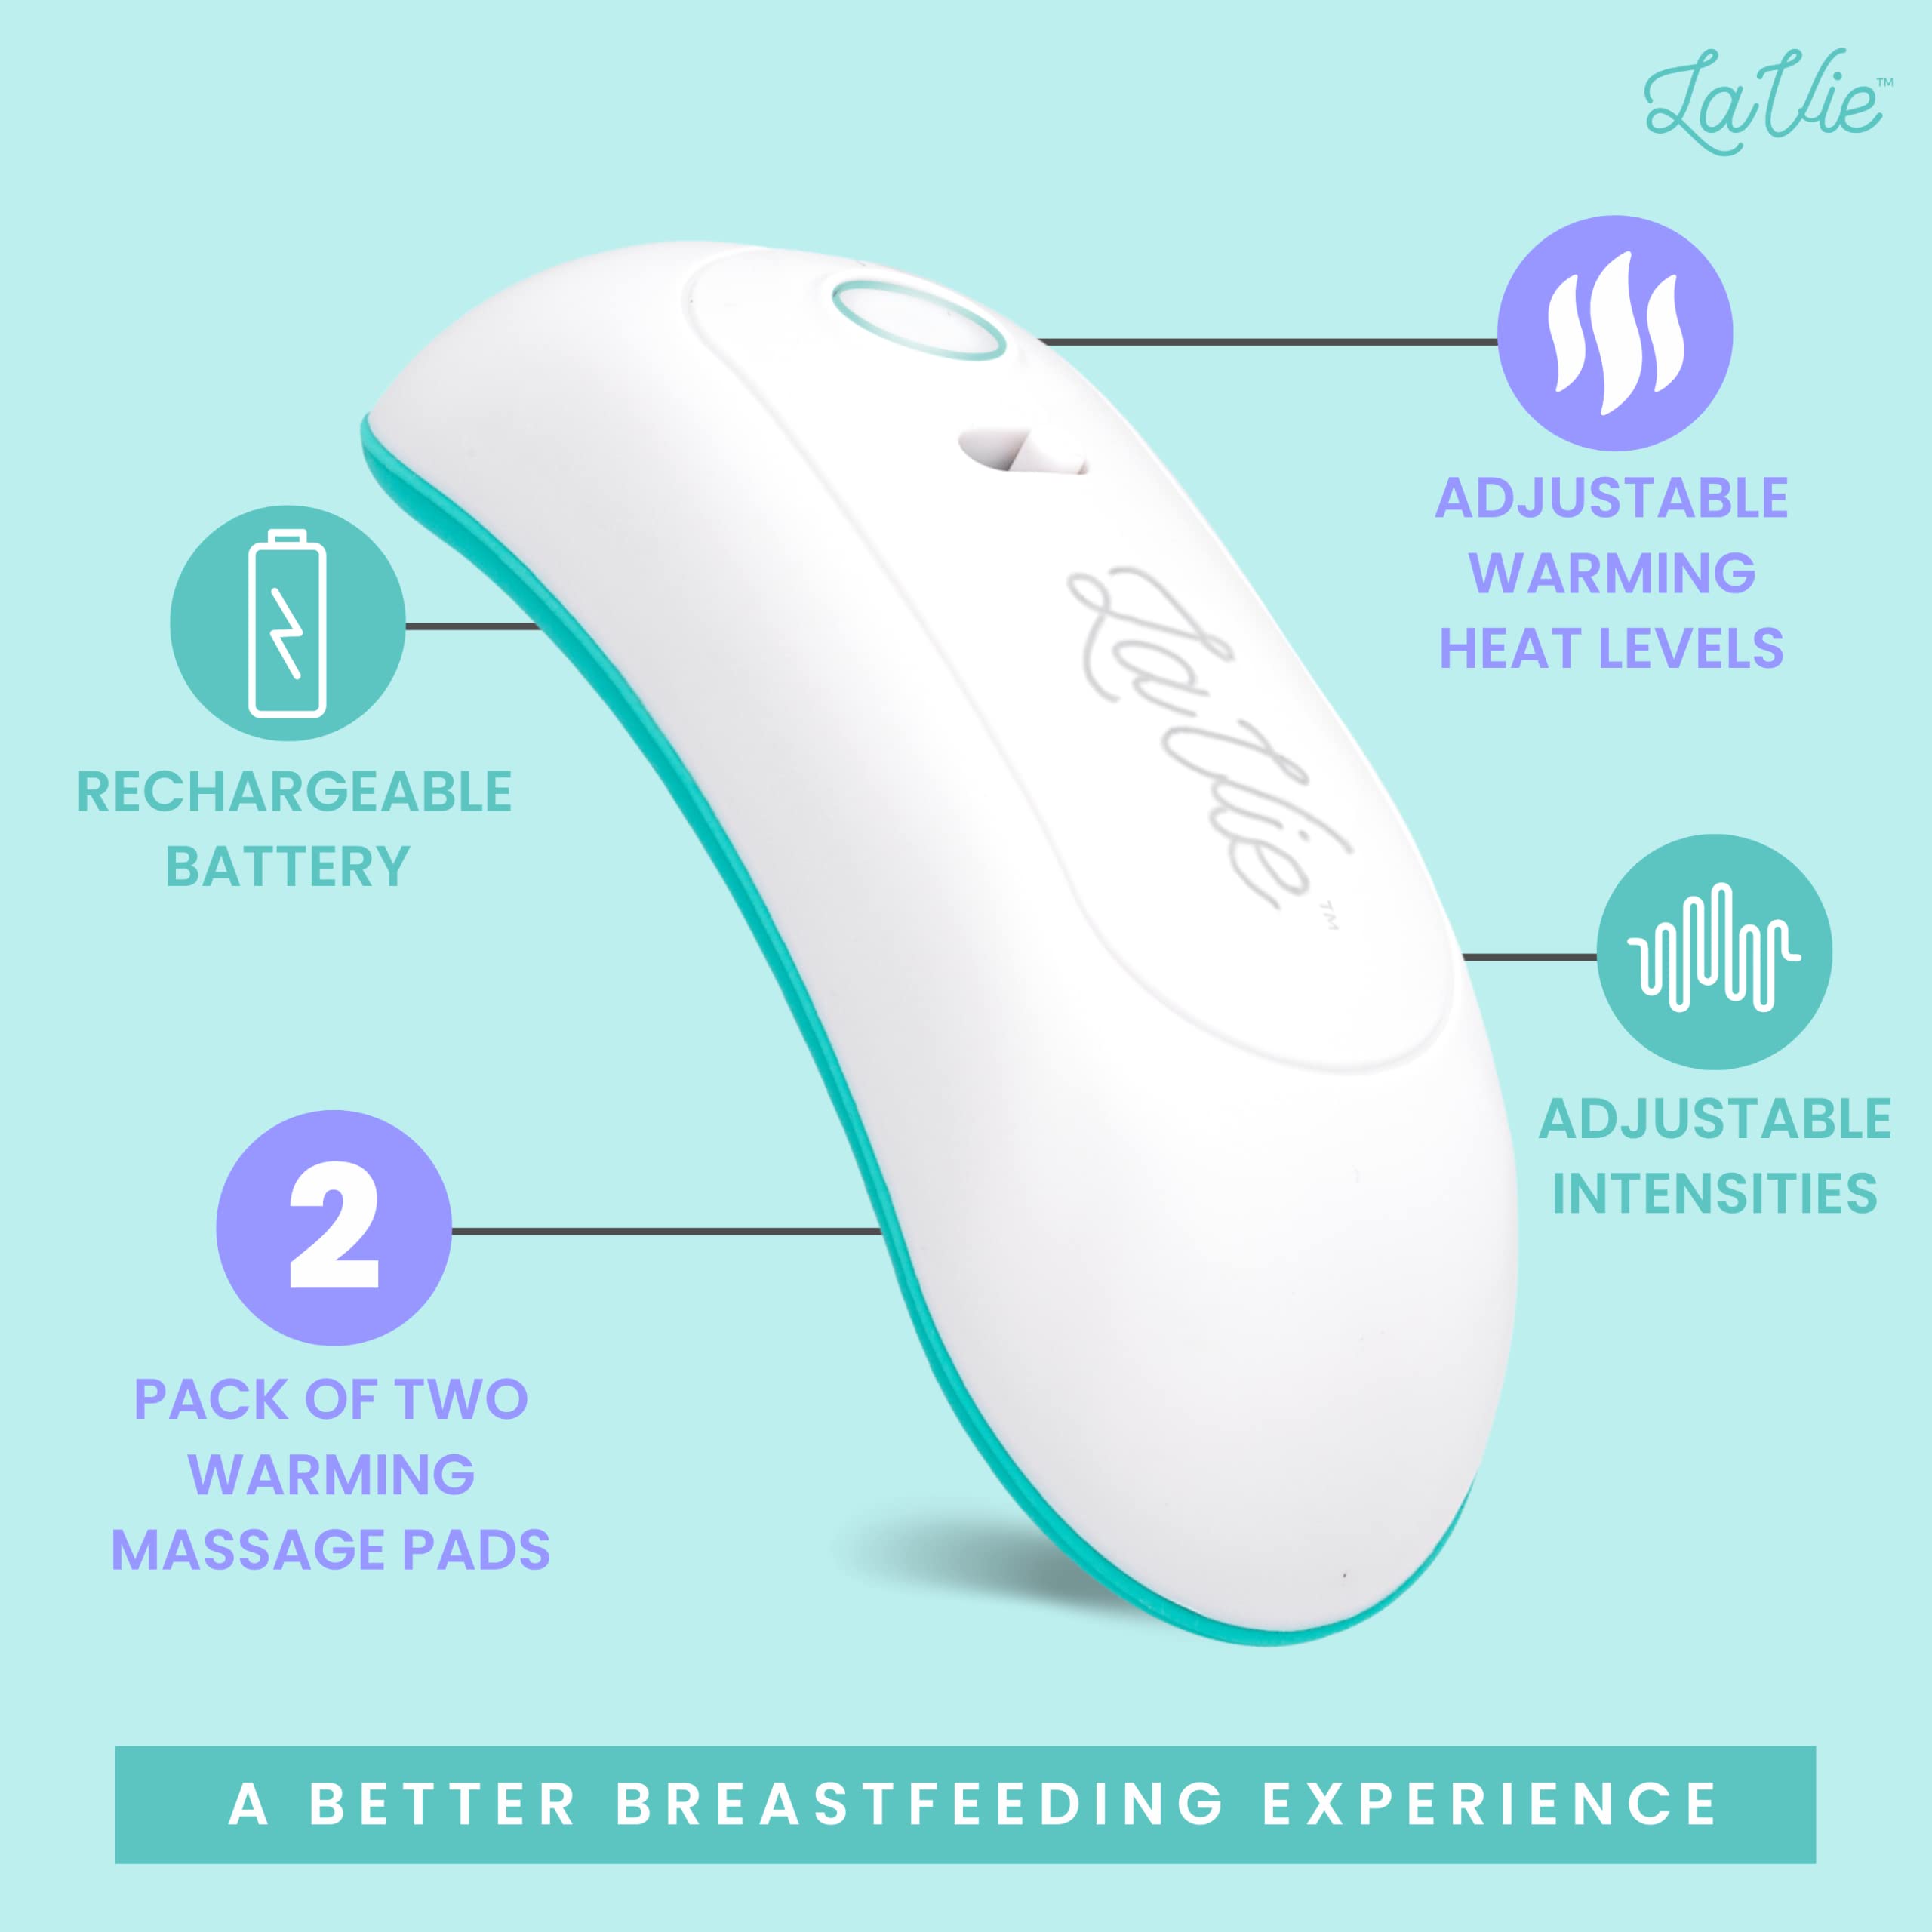 LaVie Lactation Massager with Warming for Breastfeeding | Breast Massager with Heat and Vibration for Clogged Ducts, Improved Milk Flow, and Engorged Breast Relief | Breast Warmers for Pumping 2 Pack